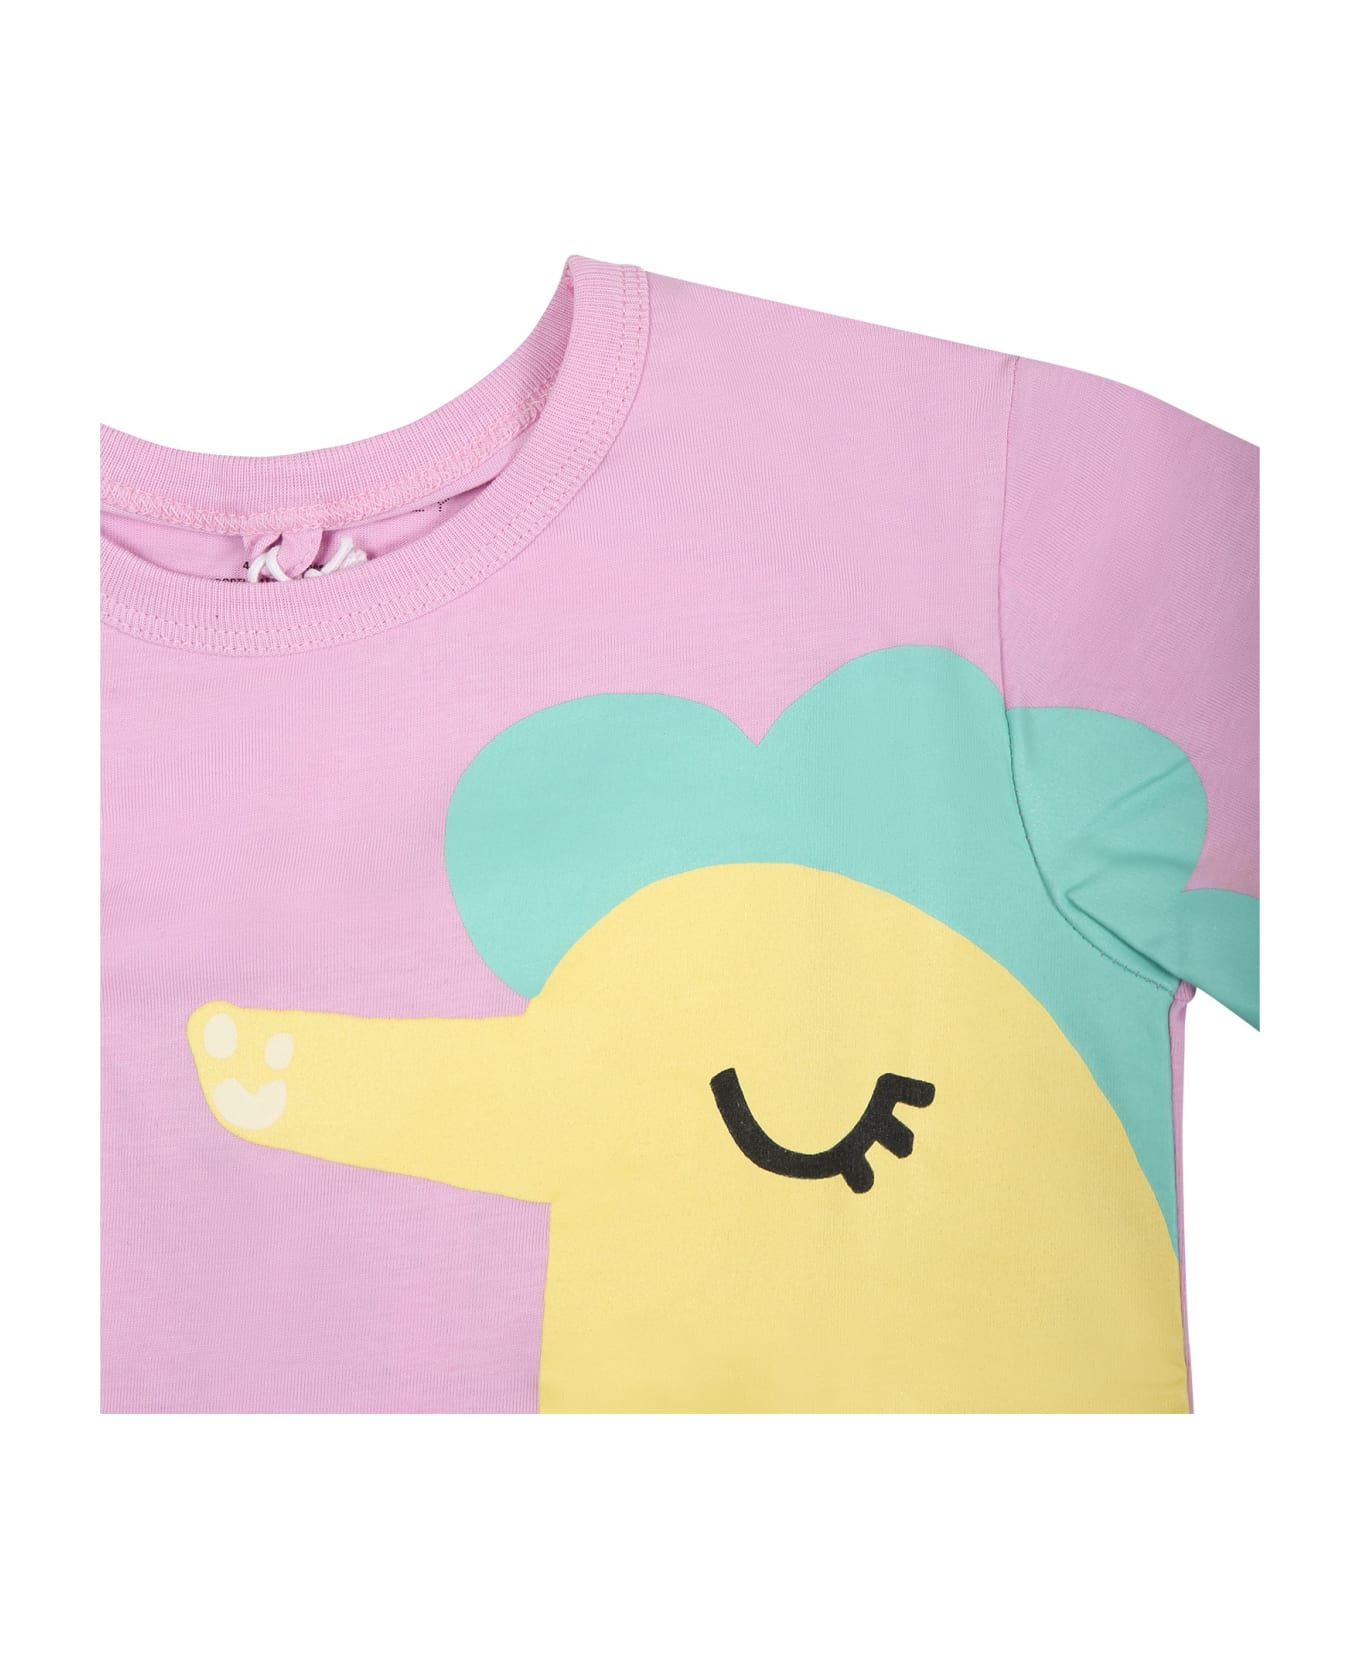 Stella McCartney Kids Pink T-shirt For Girl With Seahorse - PINK